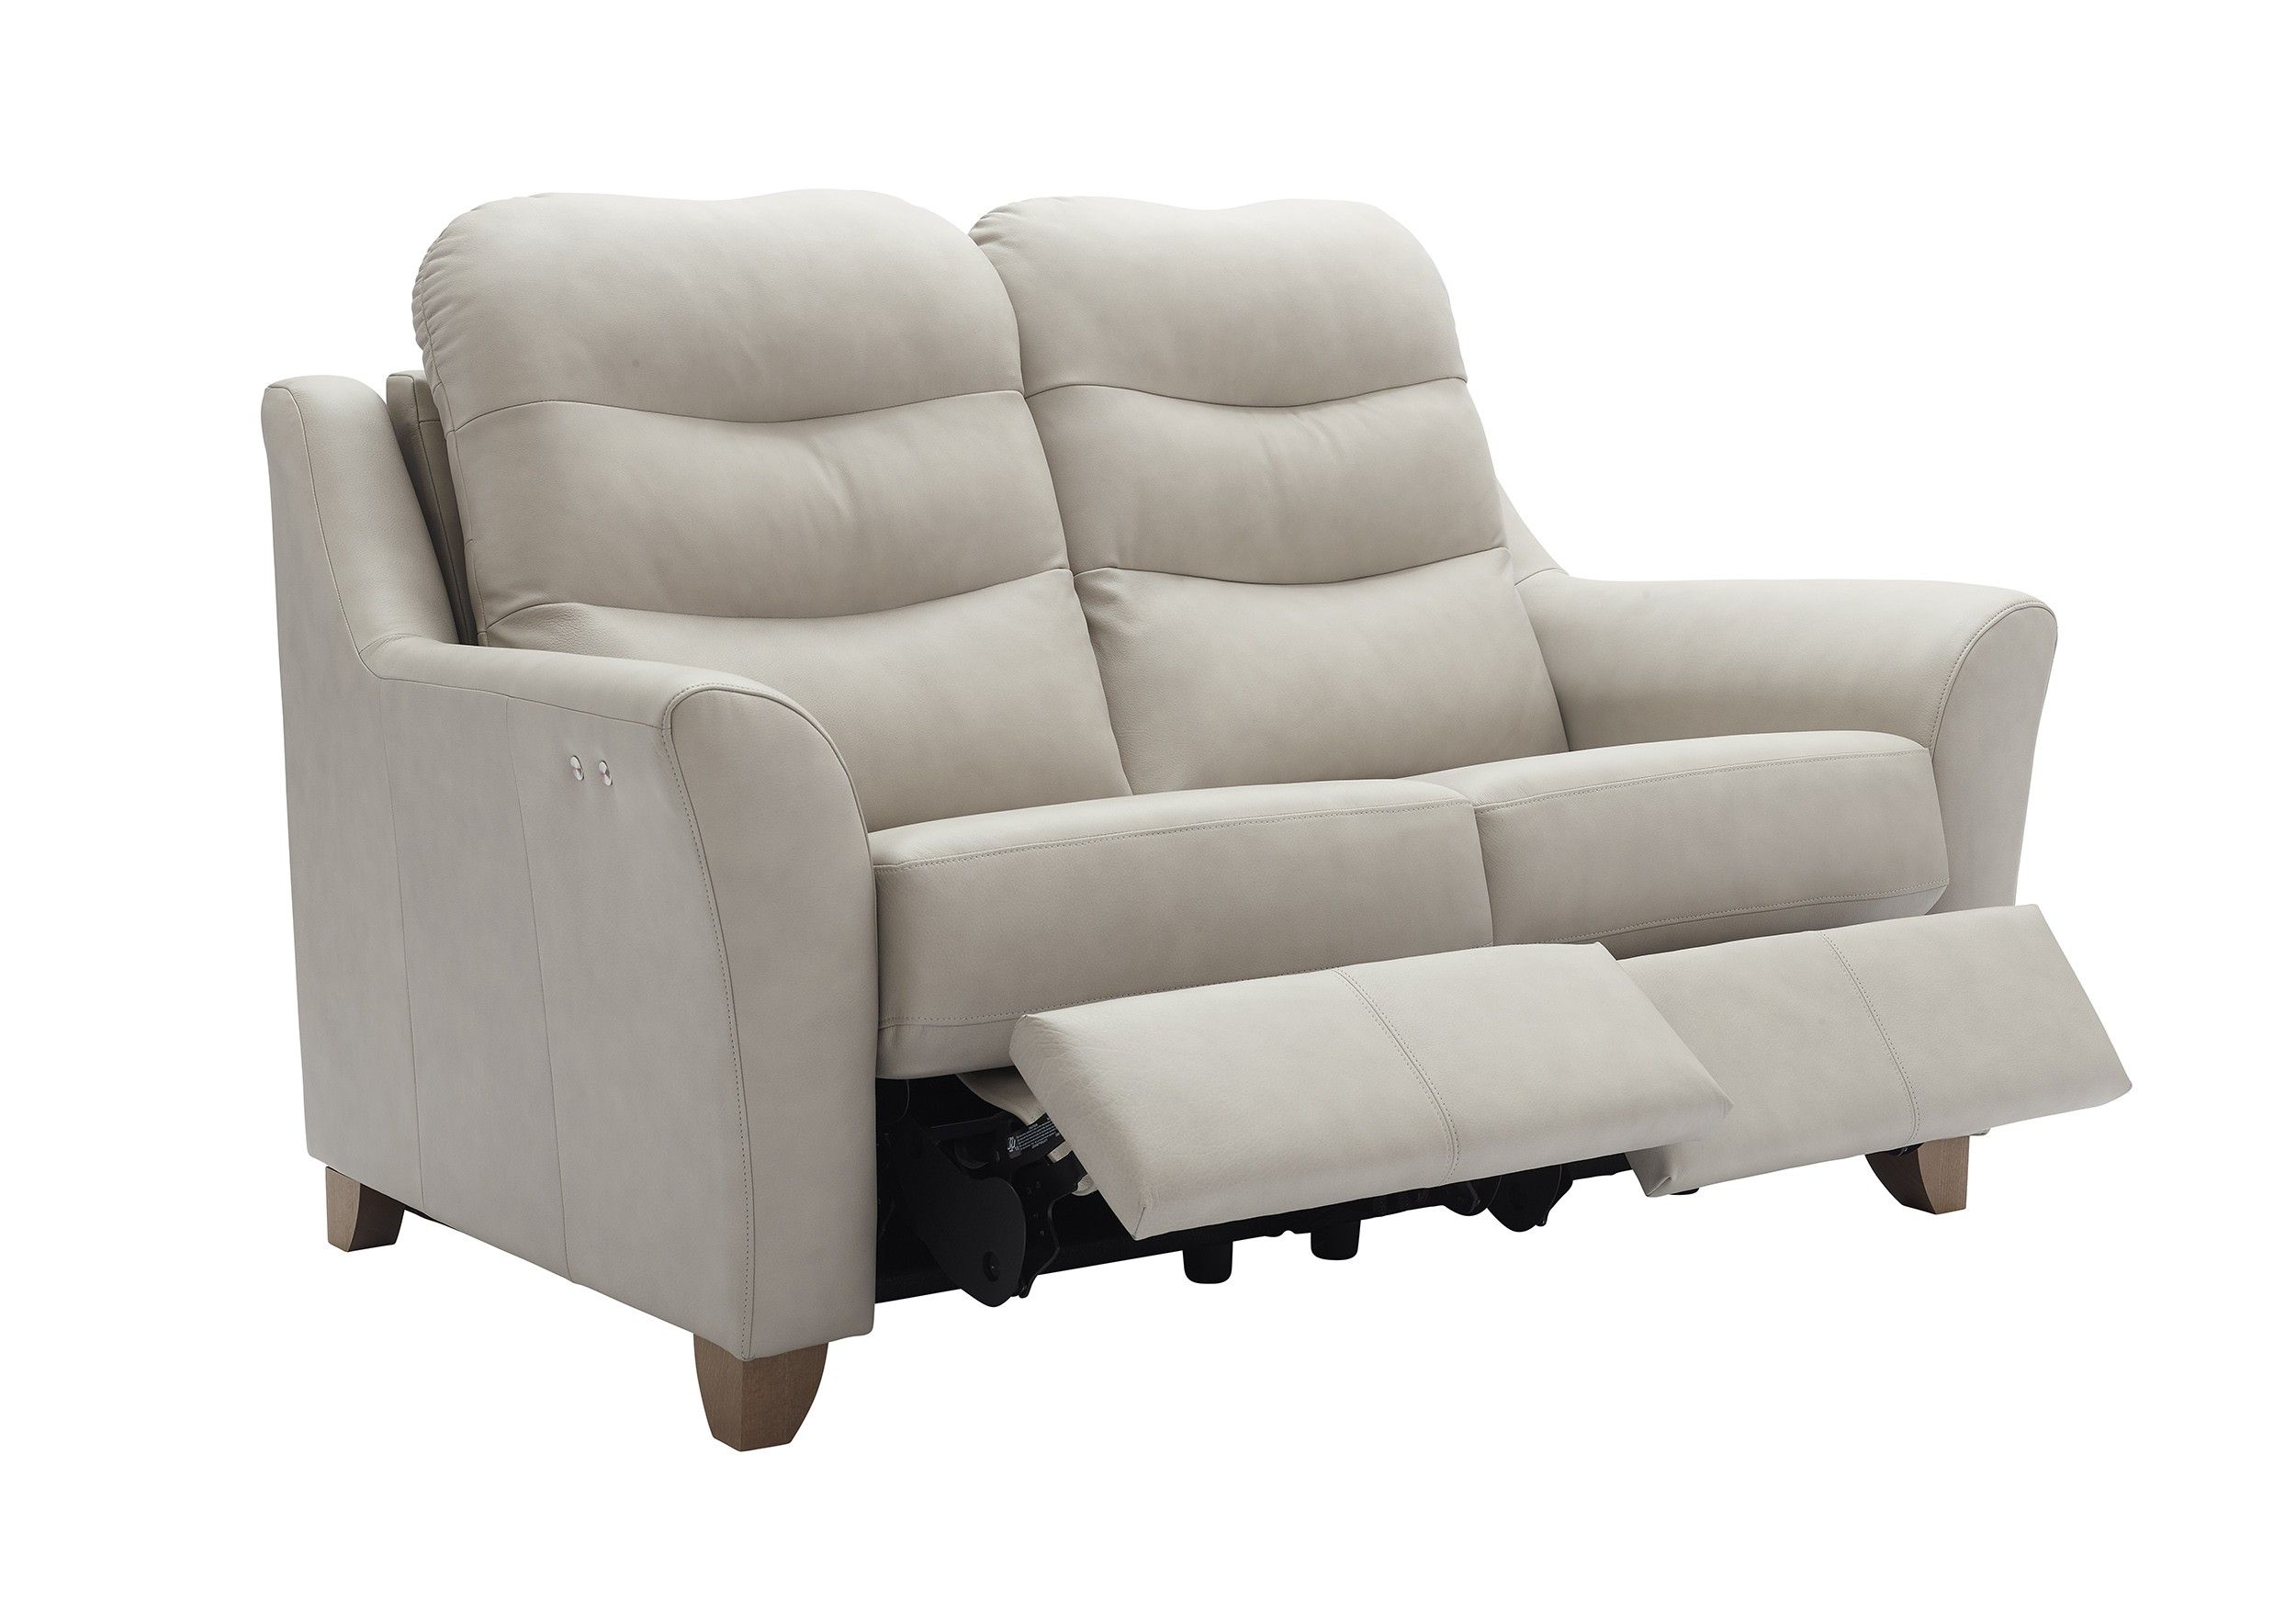 G Plan Tate Leather 2 Seater Electric Double Recliner Sofa | Tr In Tate Ii Sofa Chairs (View 6 of 25)